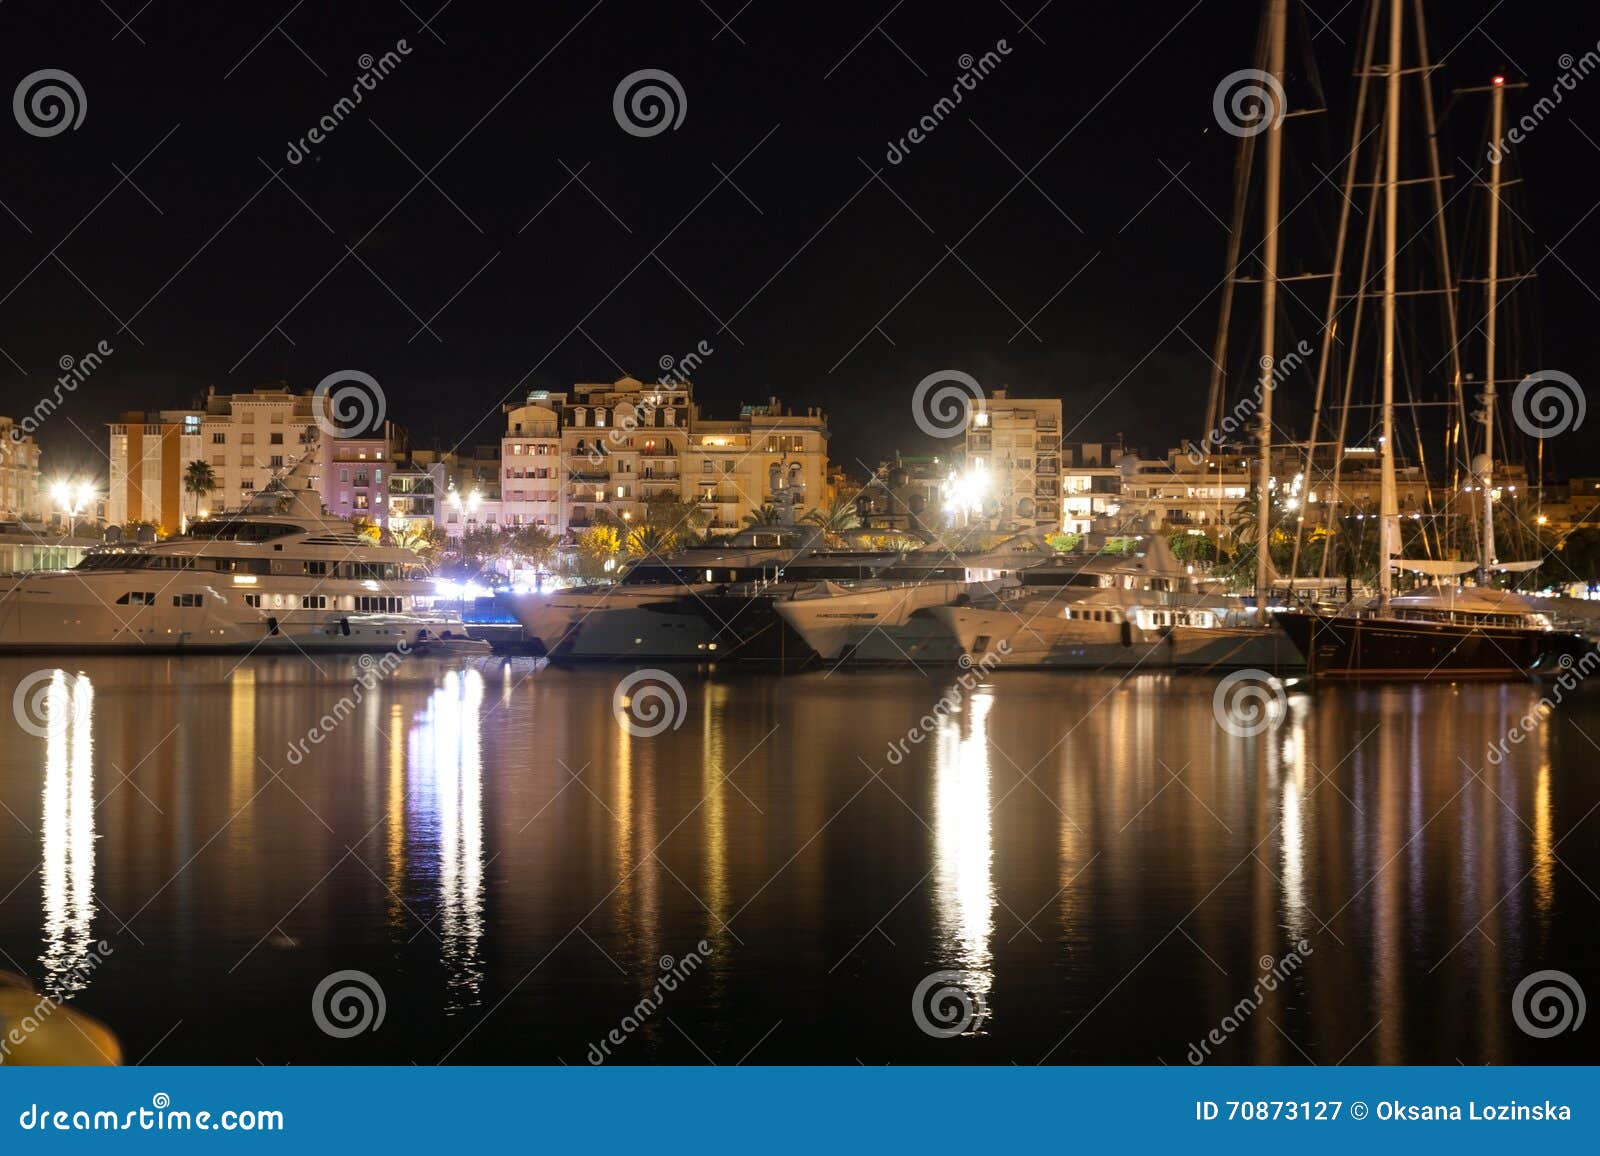 Night port in a big city stock image. Image of lcityscape - 70873127